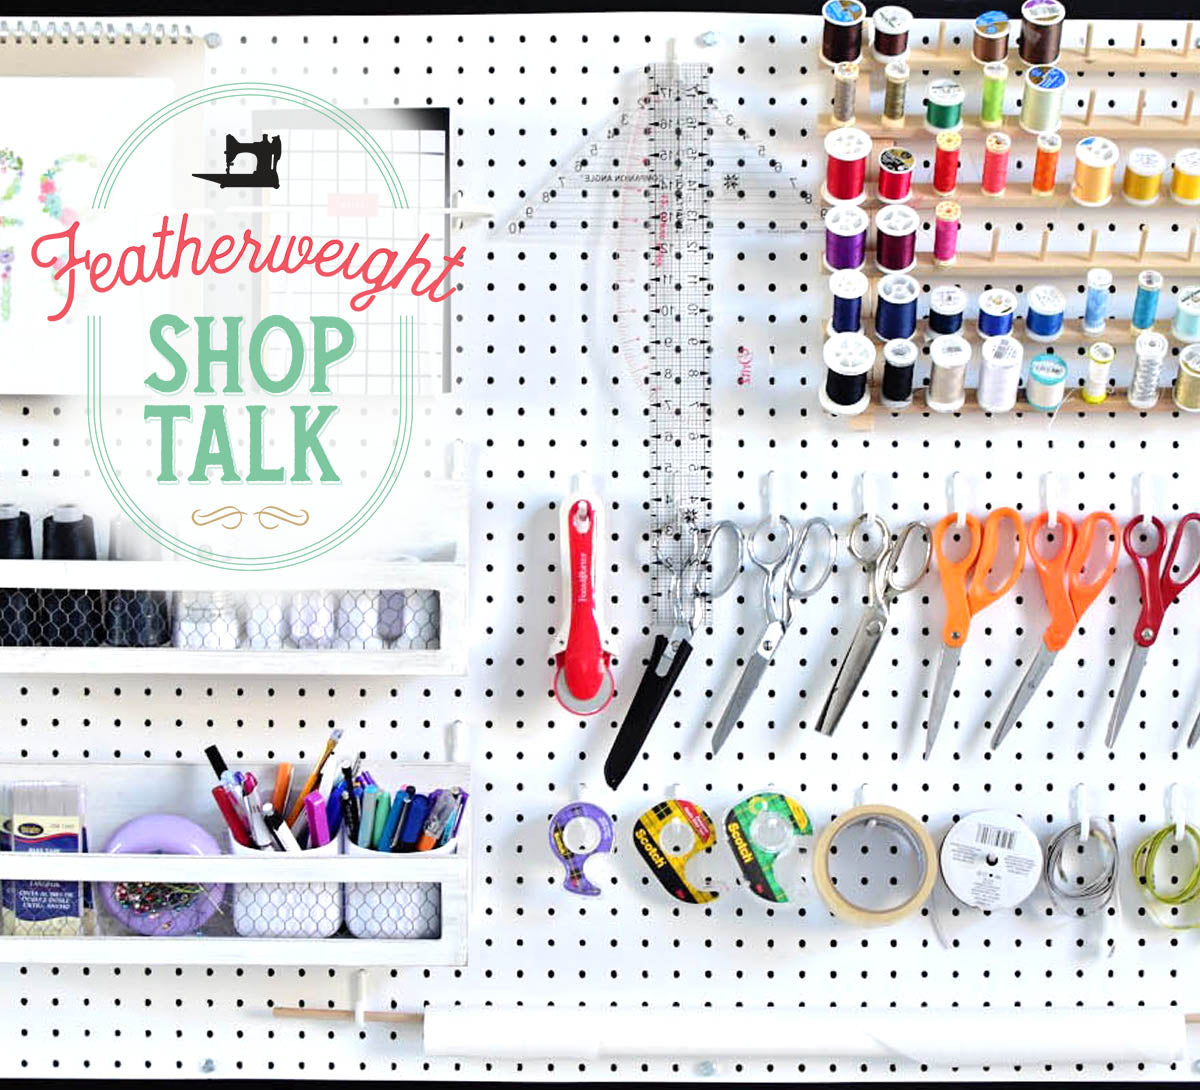 Achieving Max-Org: How We Stay Organized in Our Sewing Studio